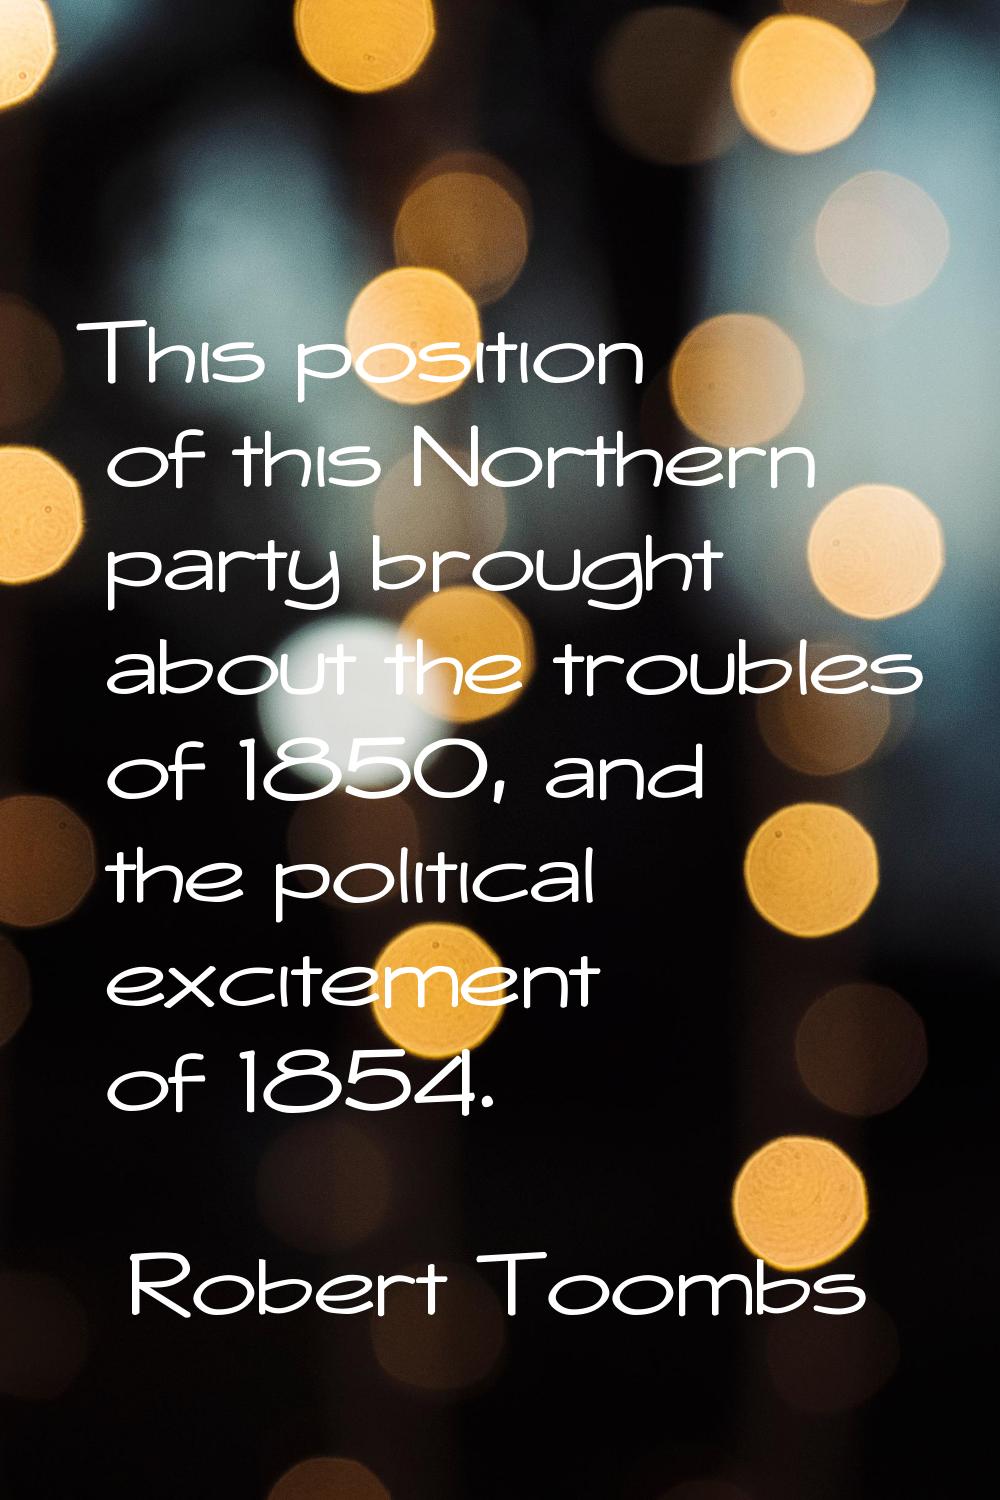 This position of this Northern party brought about the troubles of 1850, and the political exciteme